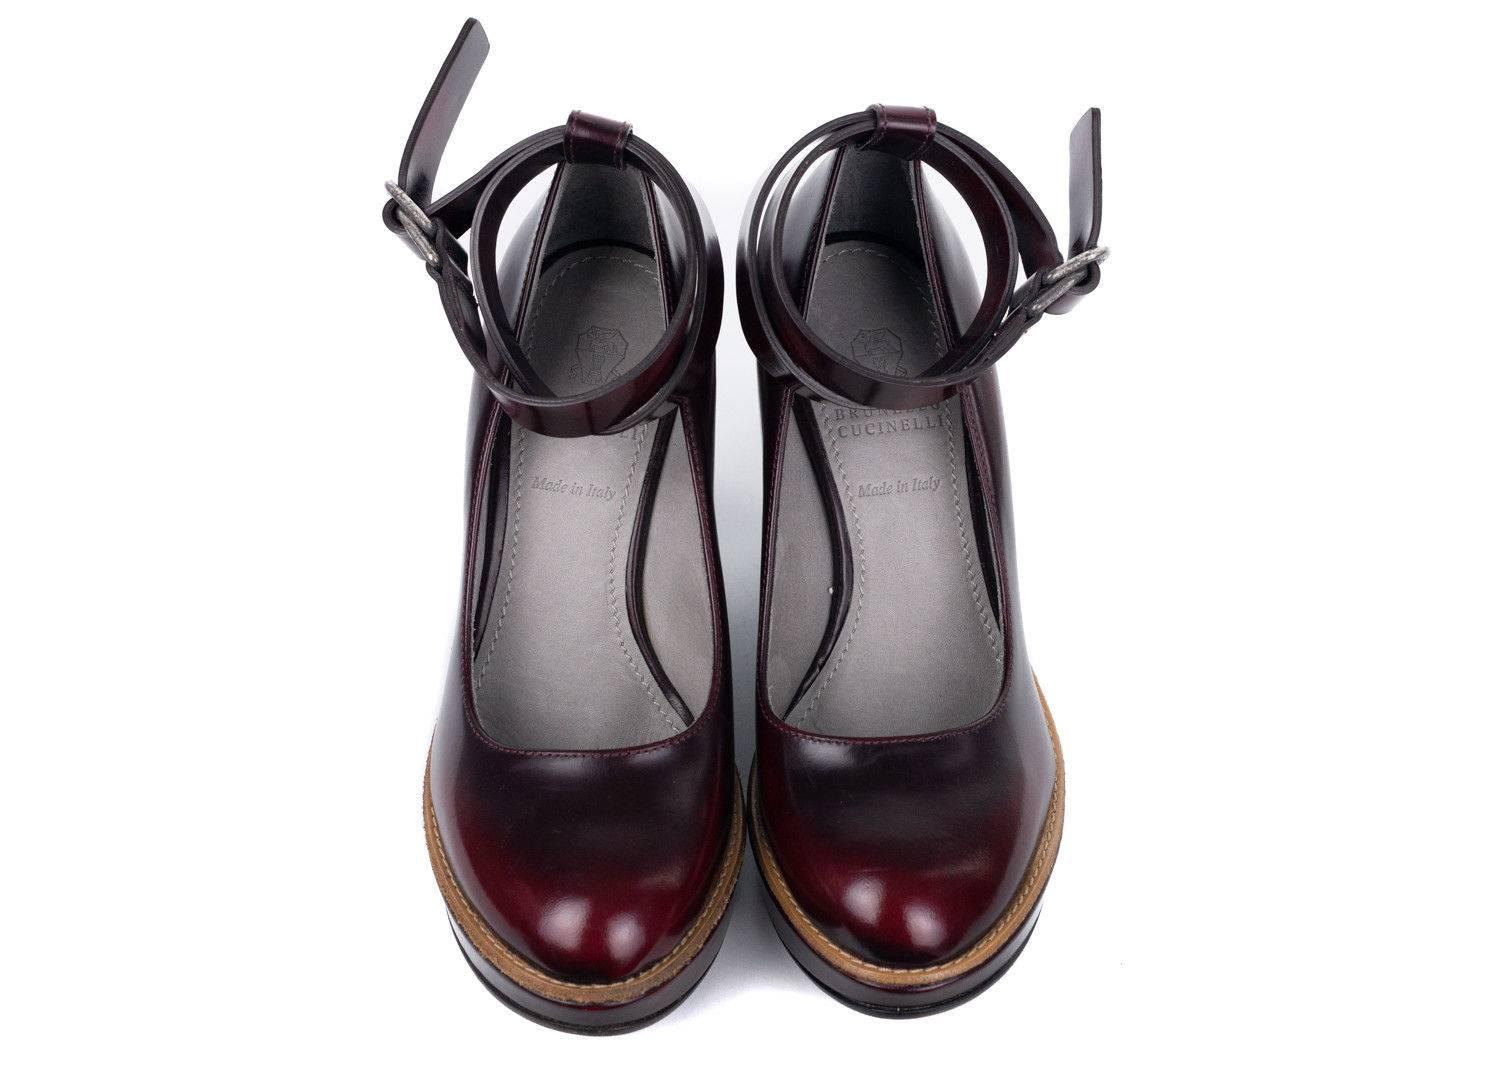 Brunello Cucinelli Women's Burgundy Wedges Sandals In New Condition For Sale In Brooklyn, NY